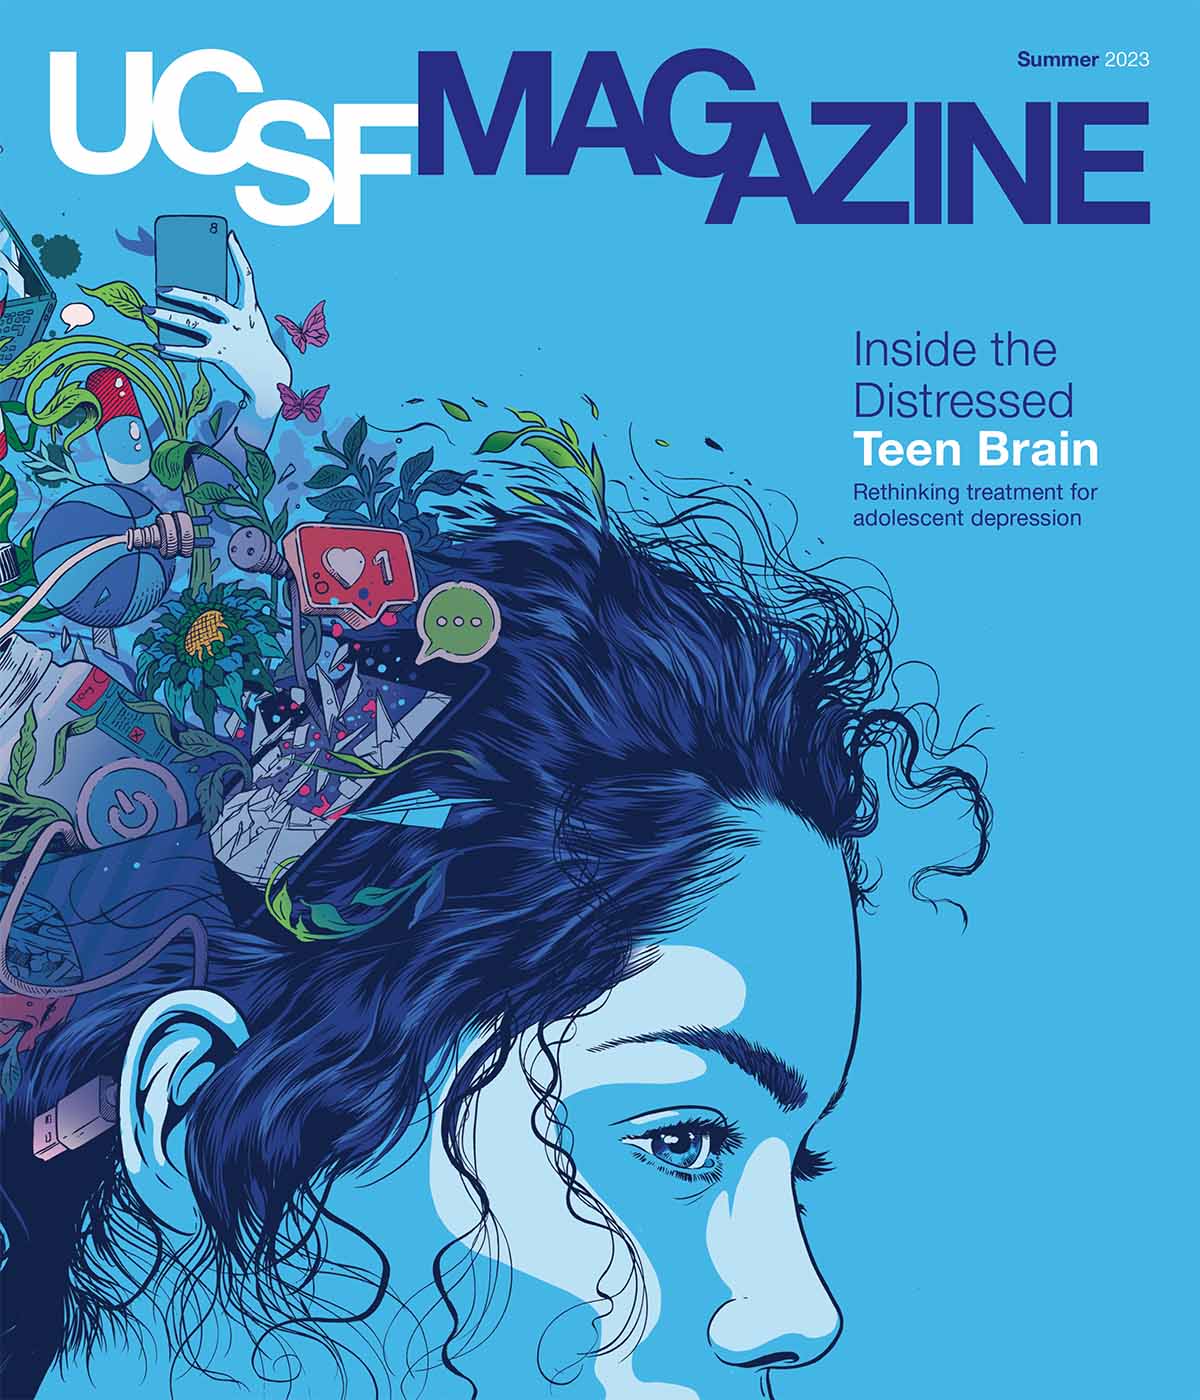 Cover of UCSF Magazine: top reads “UCSF Magazine, Summer 2023”. Text below reads “Inside the Distressed Teen Brain: Rethinking treatment for adolescent depression”. Illustration of a teenager with images of cell phones, social media like icons, pills, basketball, leaves, and flowers flowing out of their head.